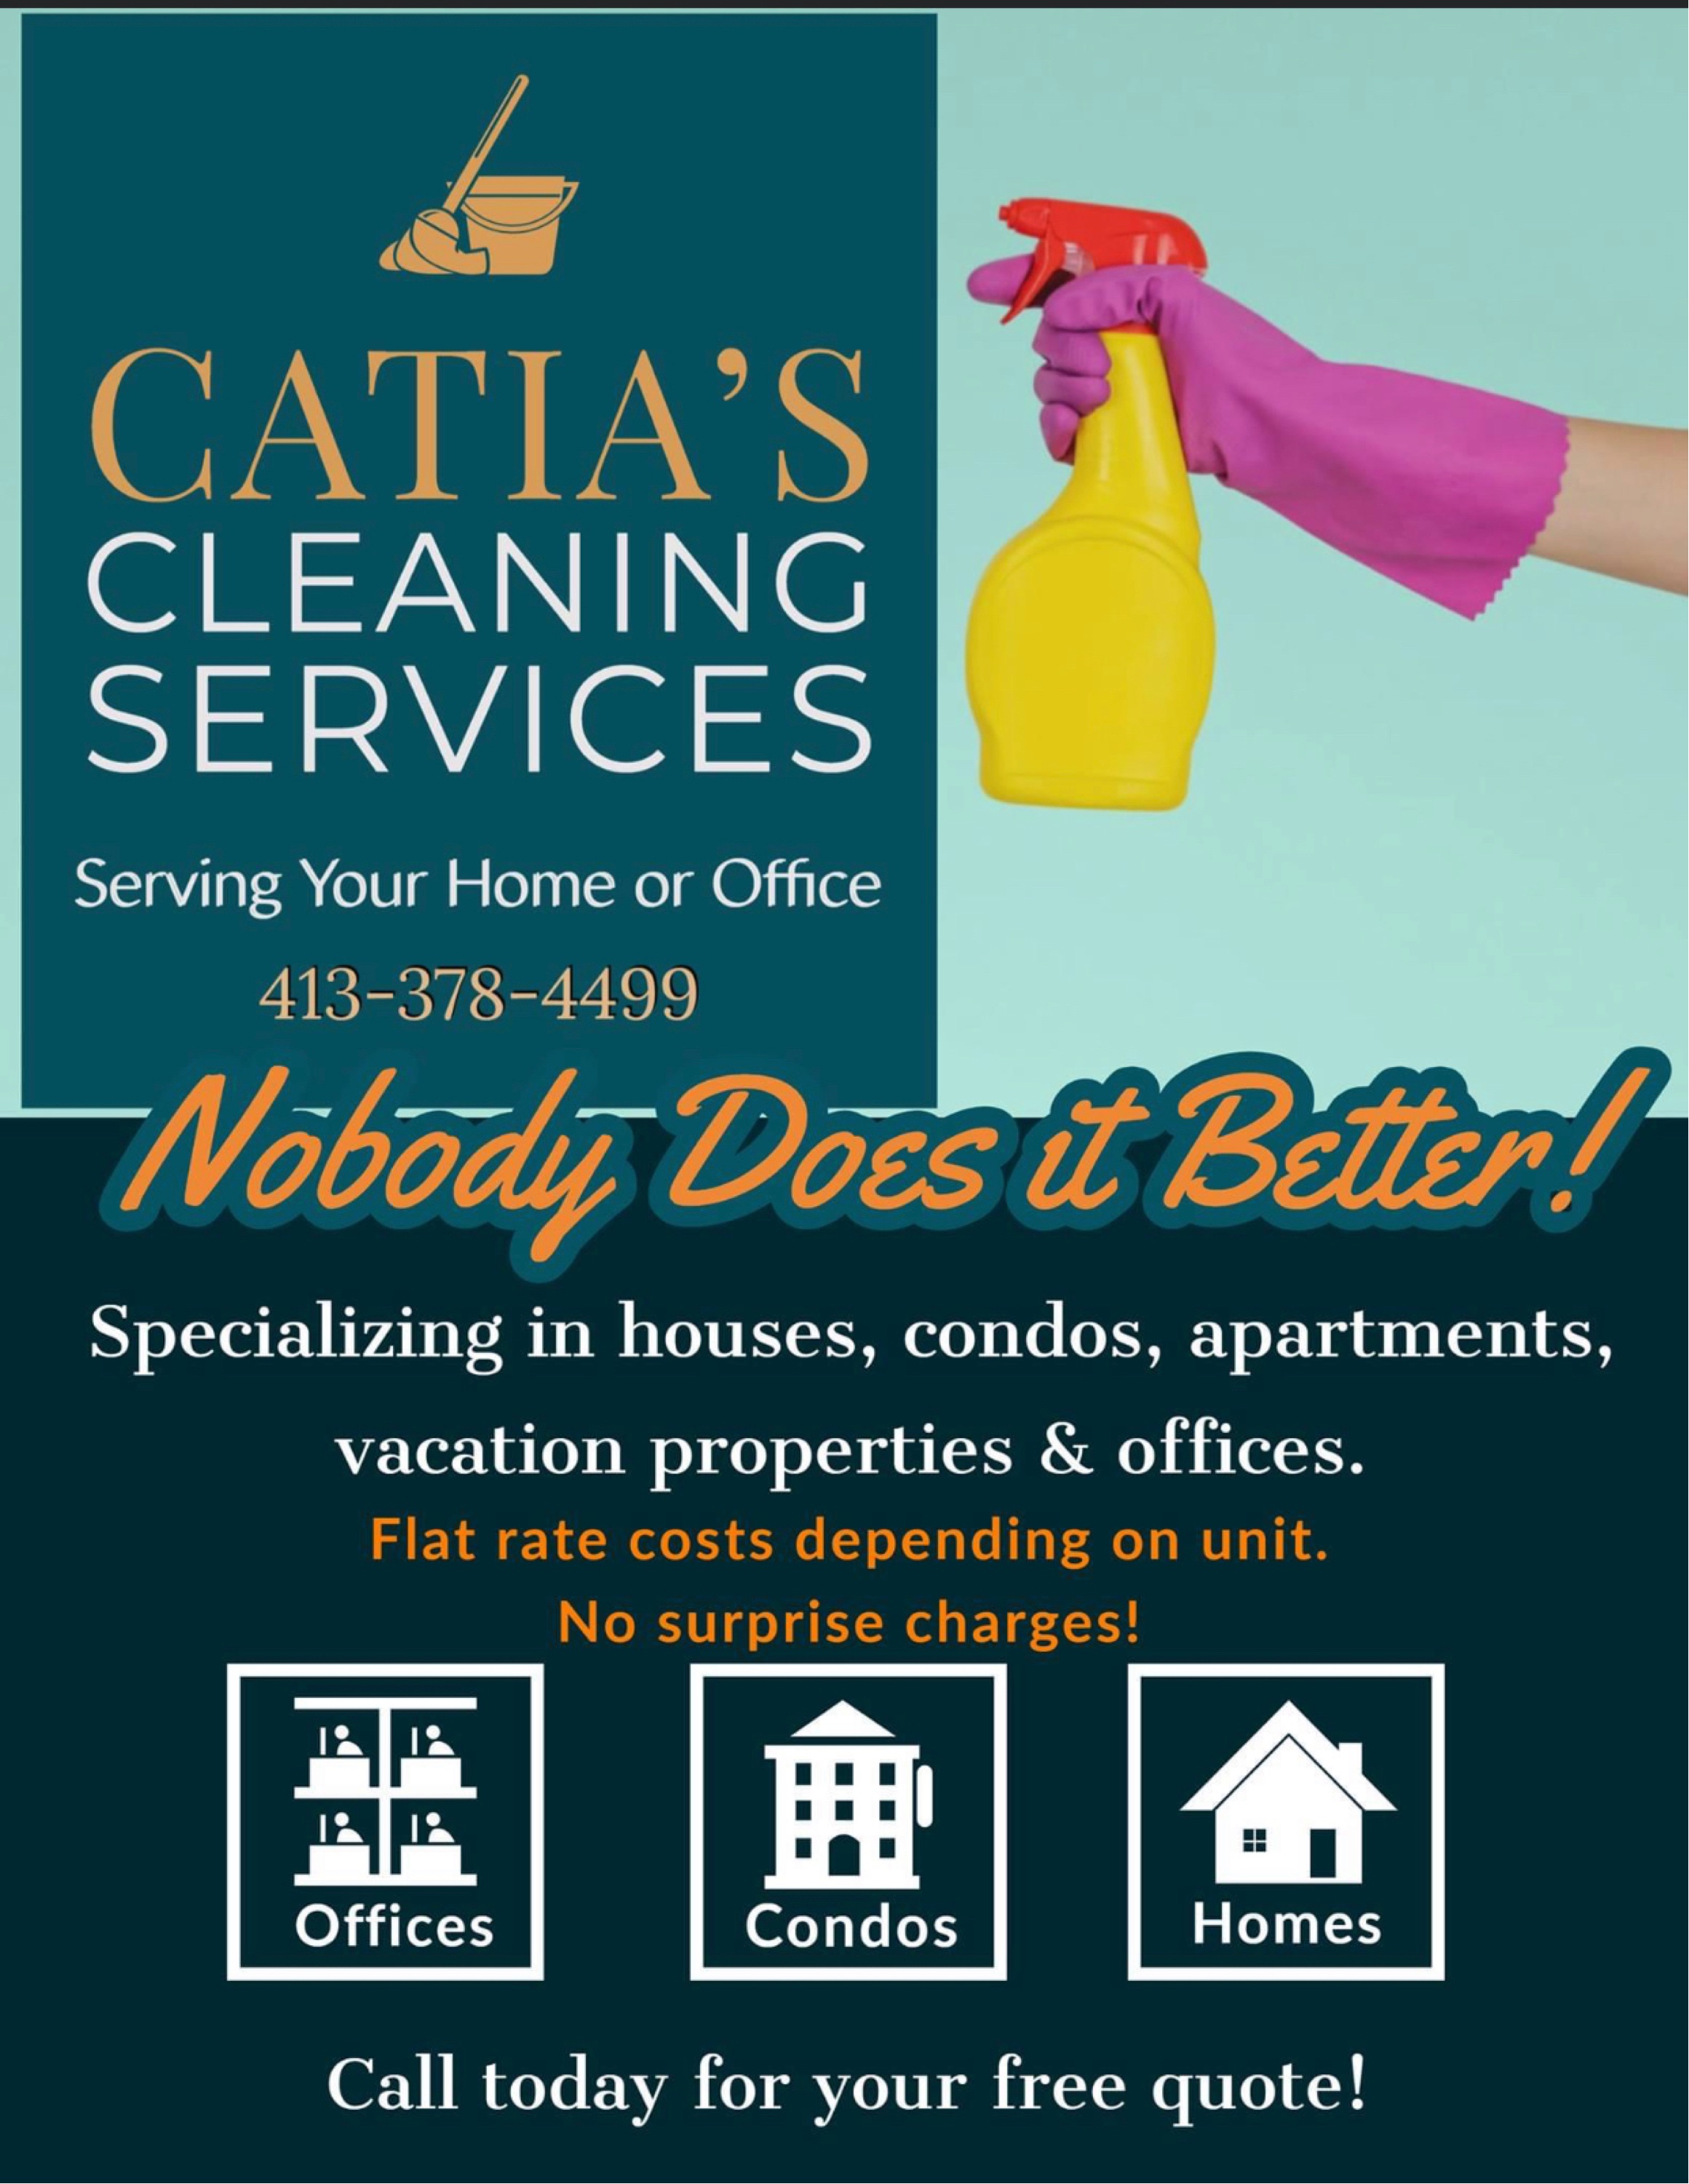 Catia's Cleaning Service Logo